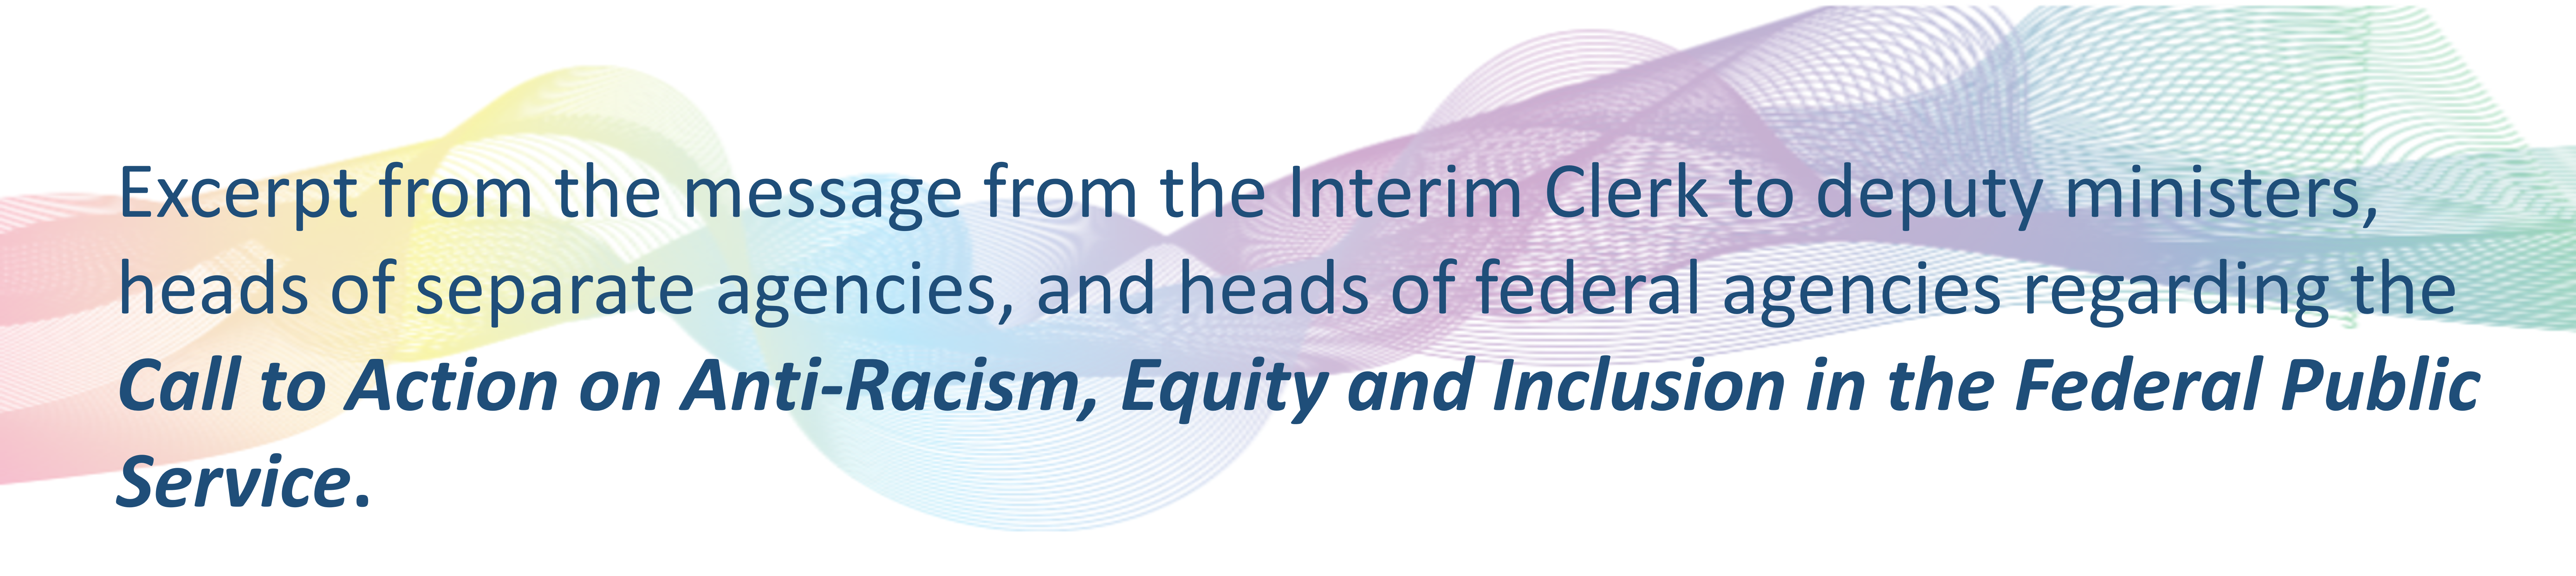 https://www.canada.ca/en/privy-council/corporate/clerk/call-to-action-anti-racism-equity-inclusion-federal-public-service.html